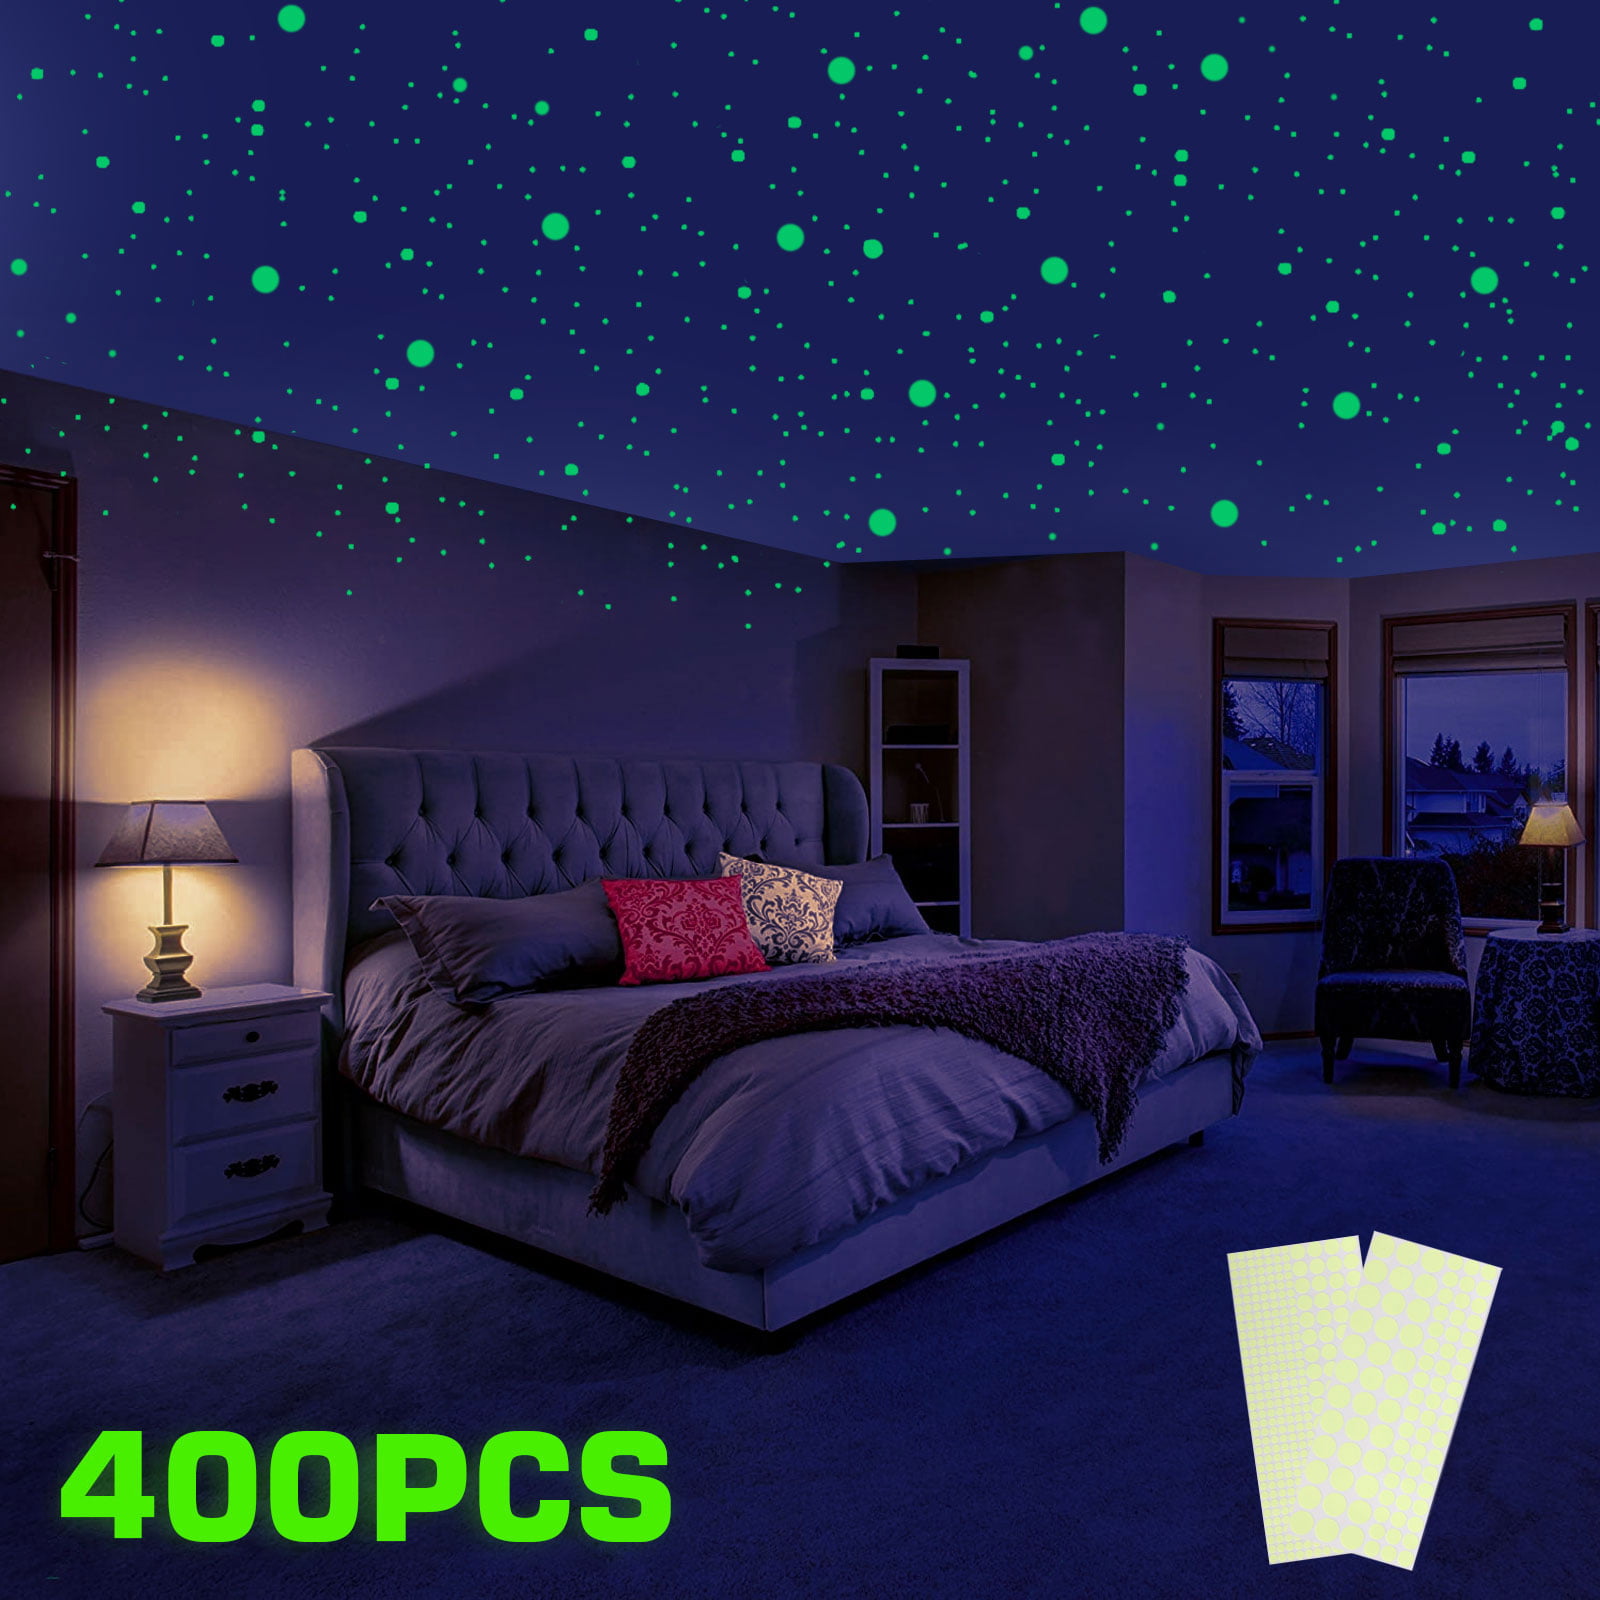 Bollepo Glow In The Dark 3D Stars And Dots Wall Stickers For Kids Bedroom 